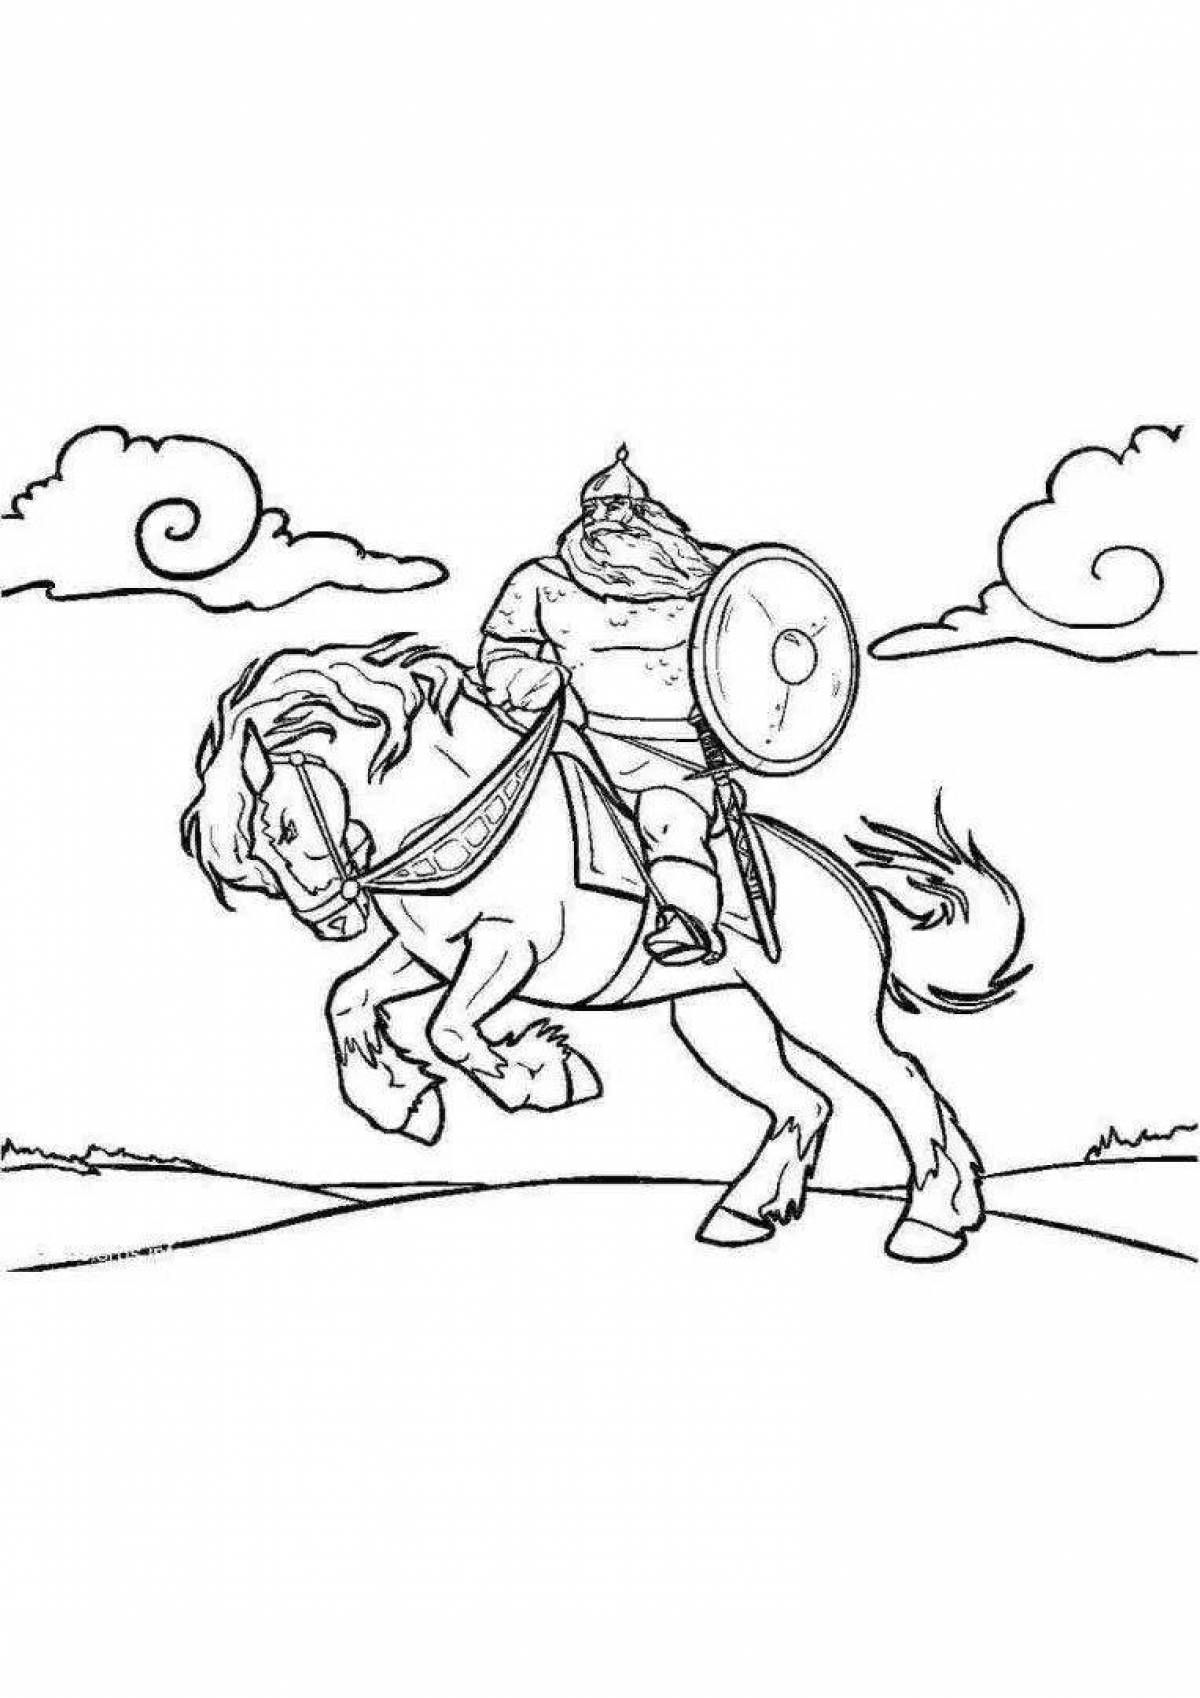 Coloring Ilya Muromets riding a horse